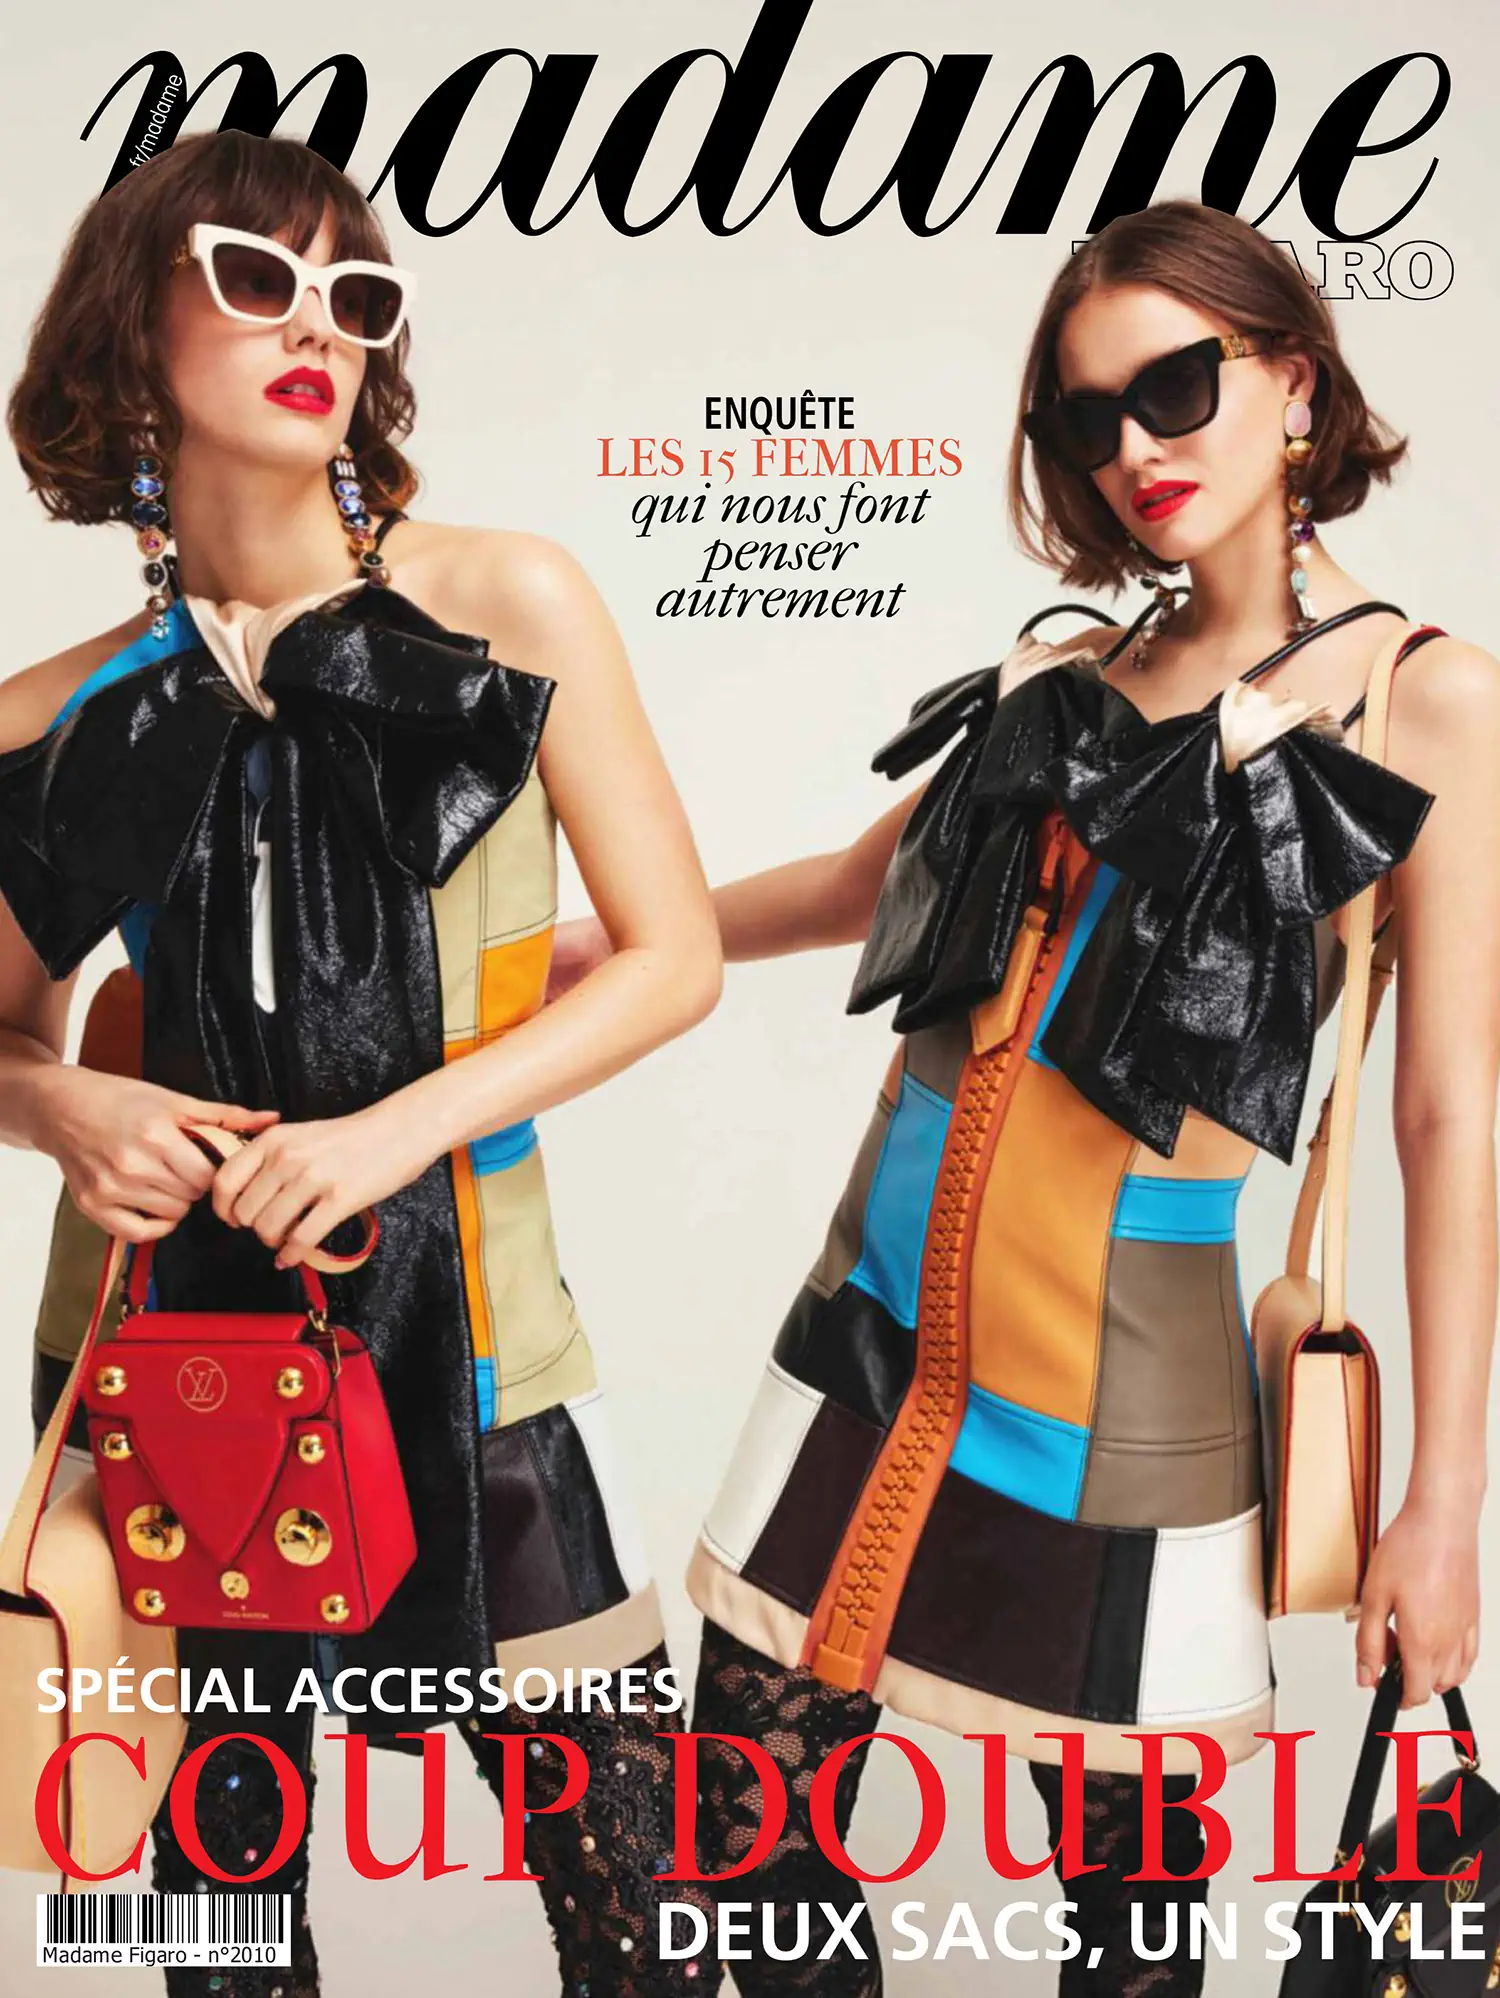 Margaux and Tess van Kommer cover Madame Figaro March 3rd, 2023 by Max Vigato